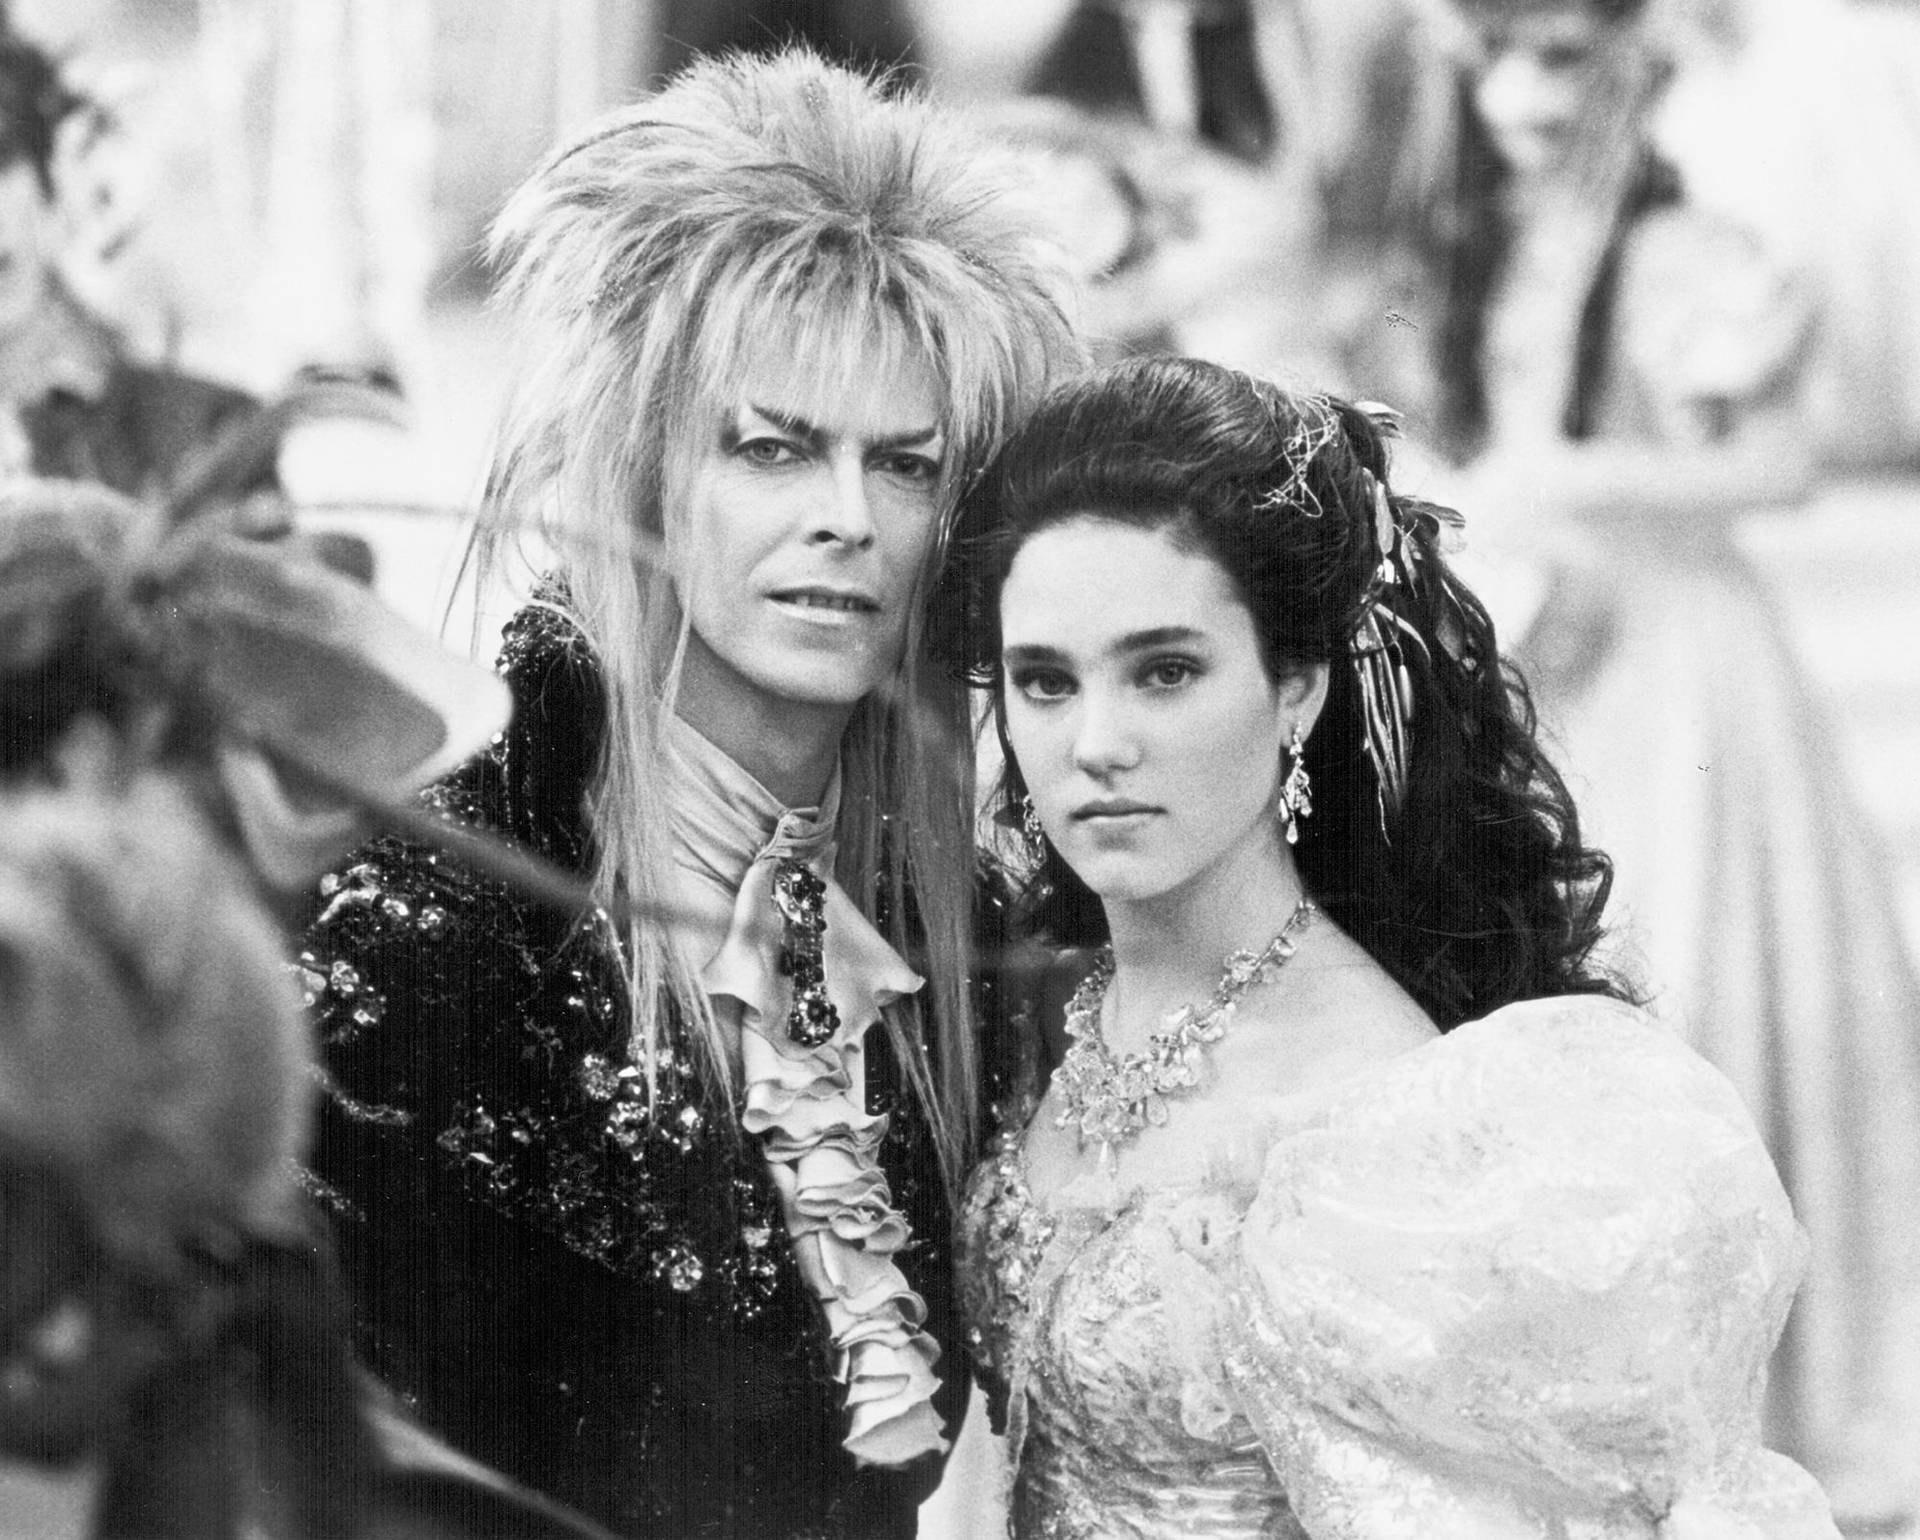 David Bowie Labyrinth Black And White